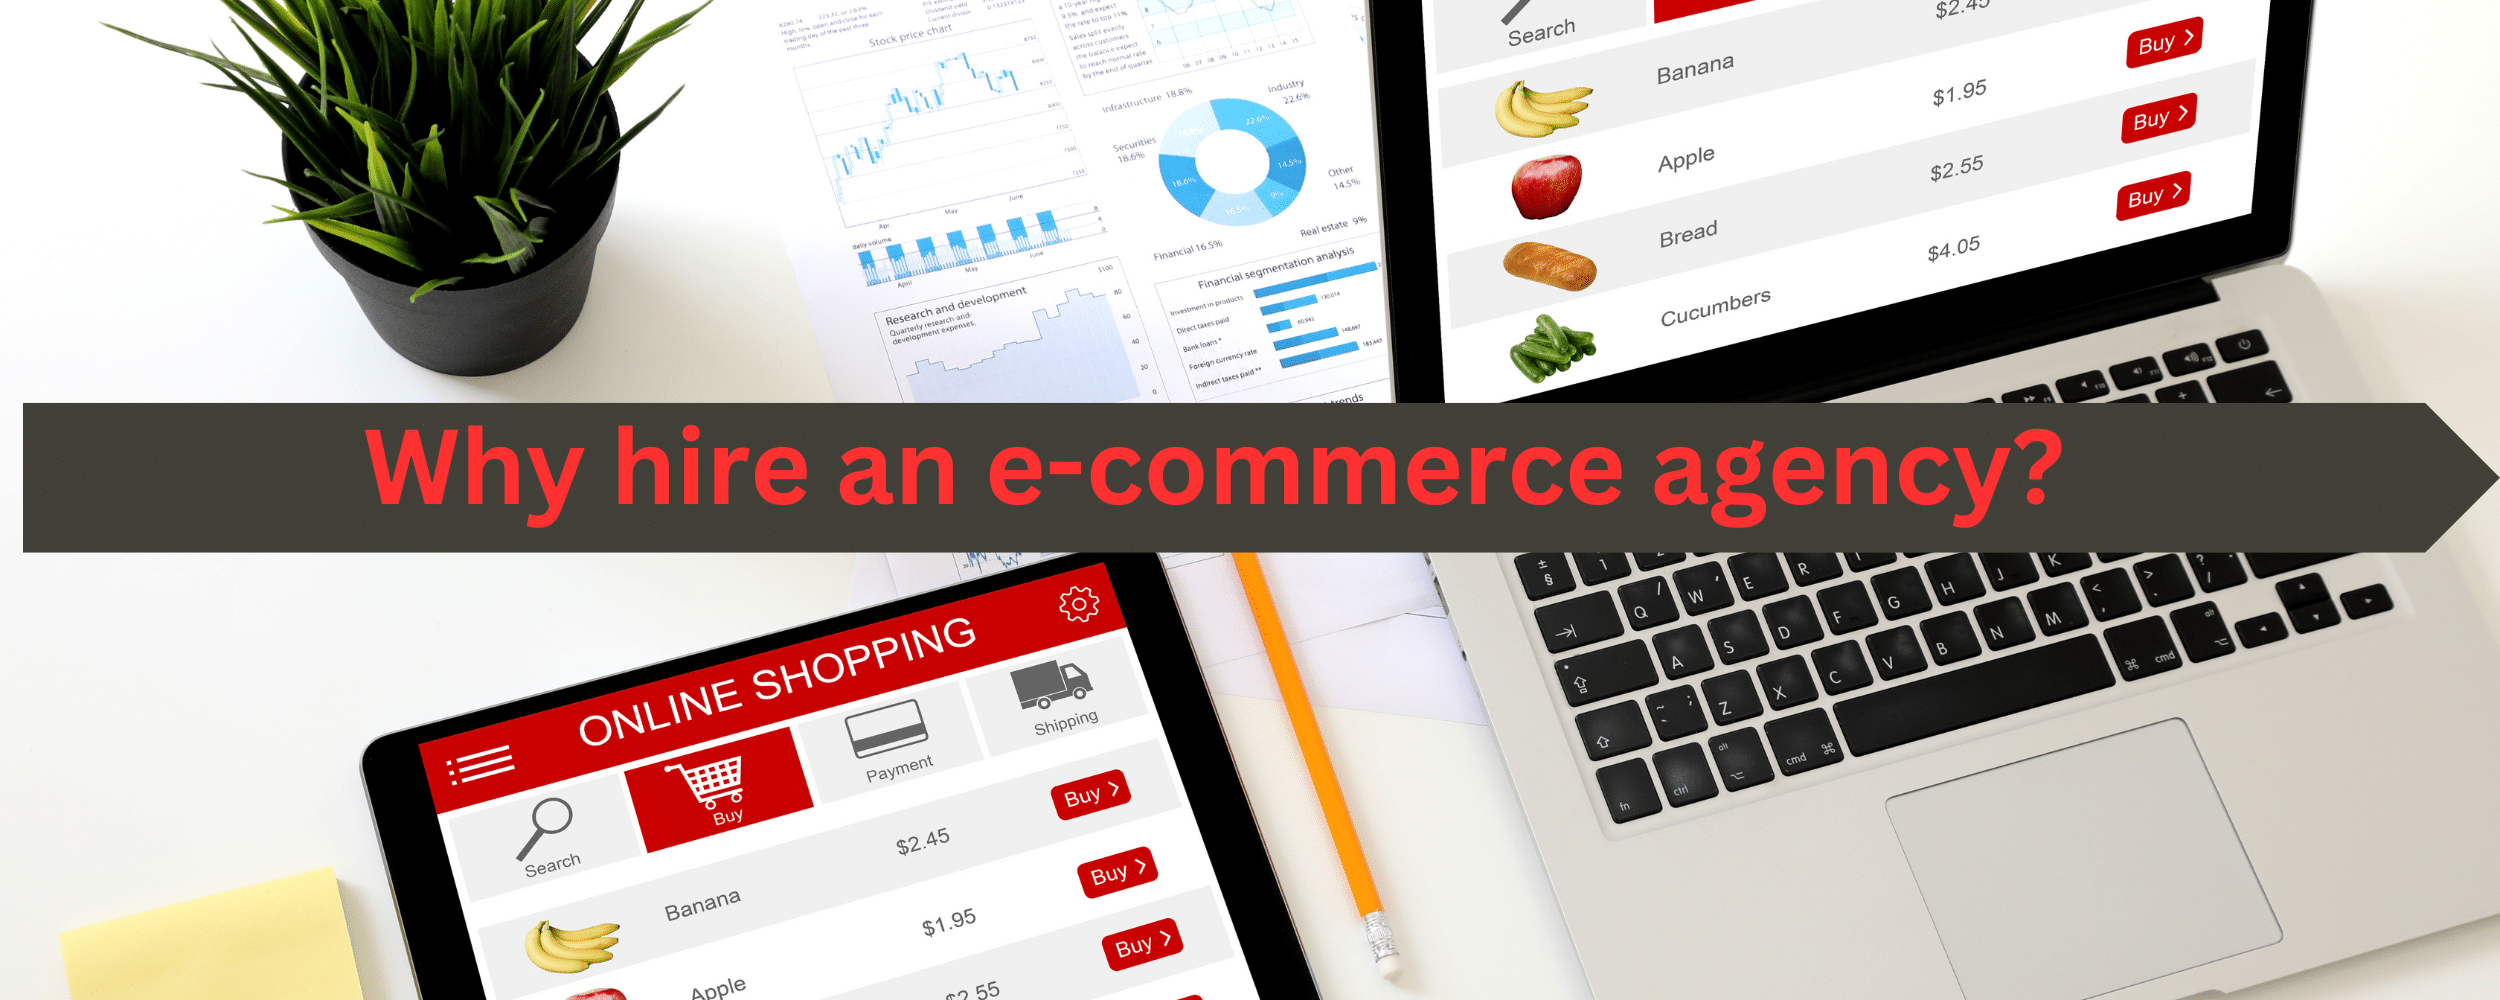 Why hire an e-commerce agency?